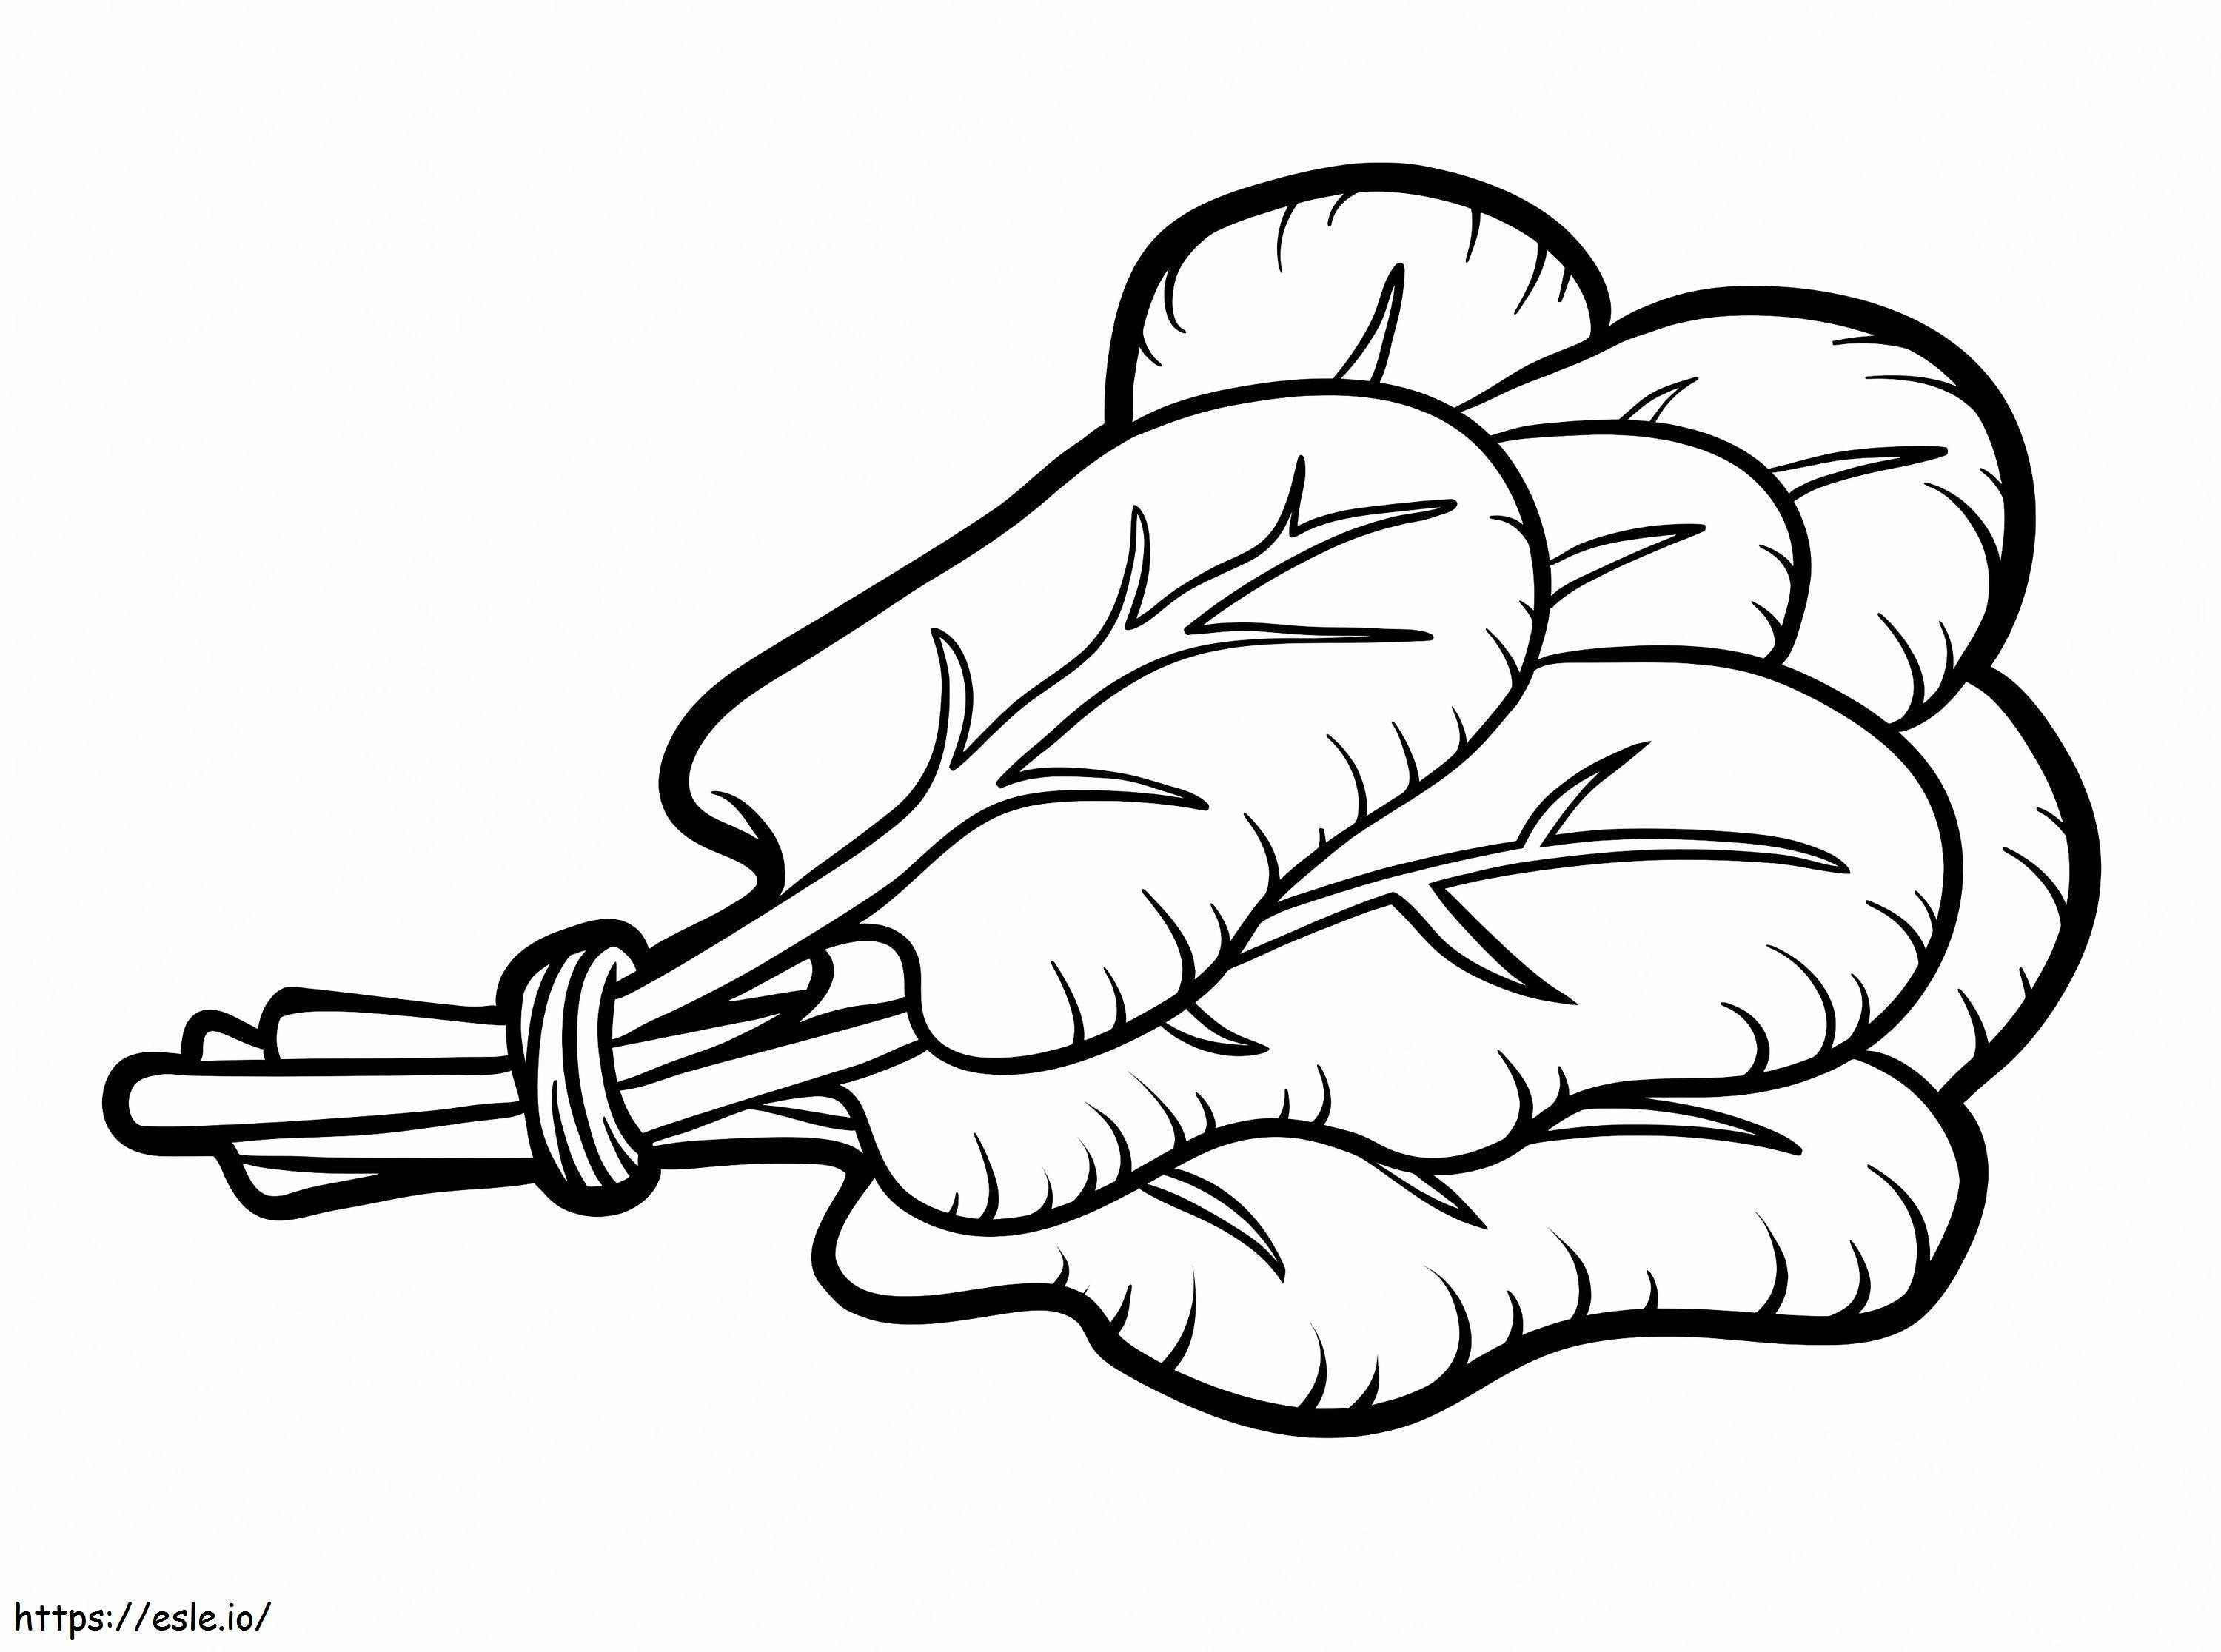 Spinach 4 coloring page